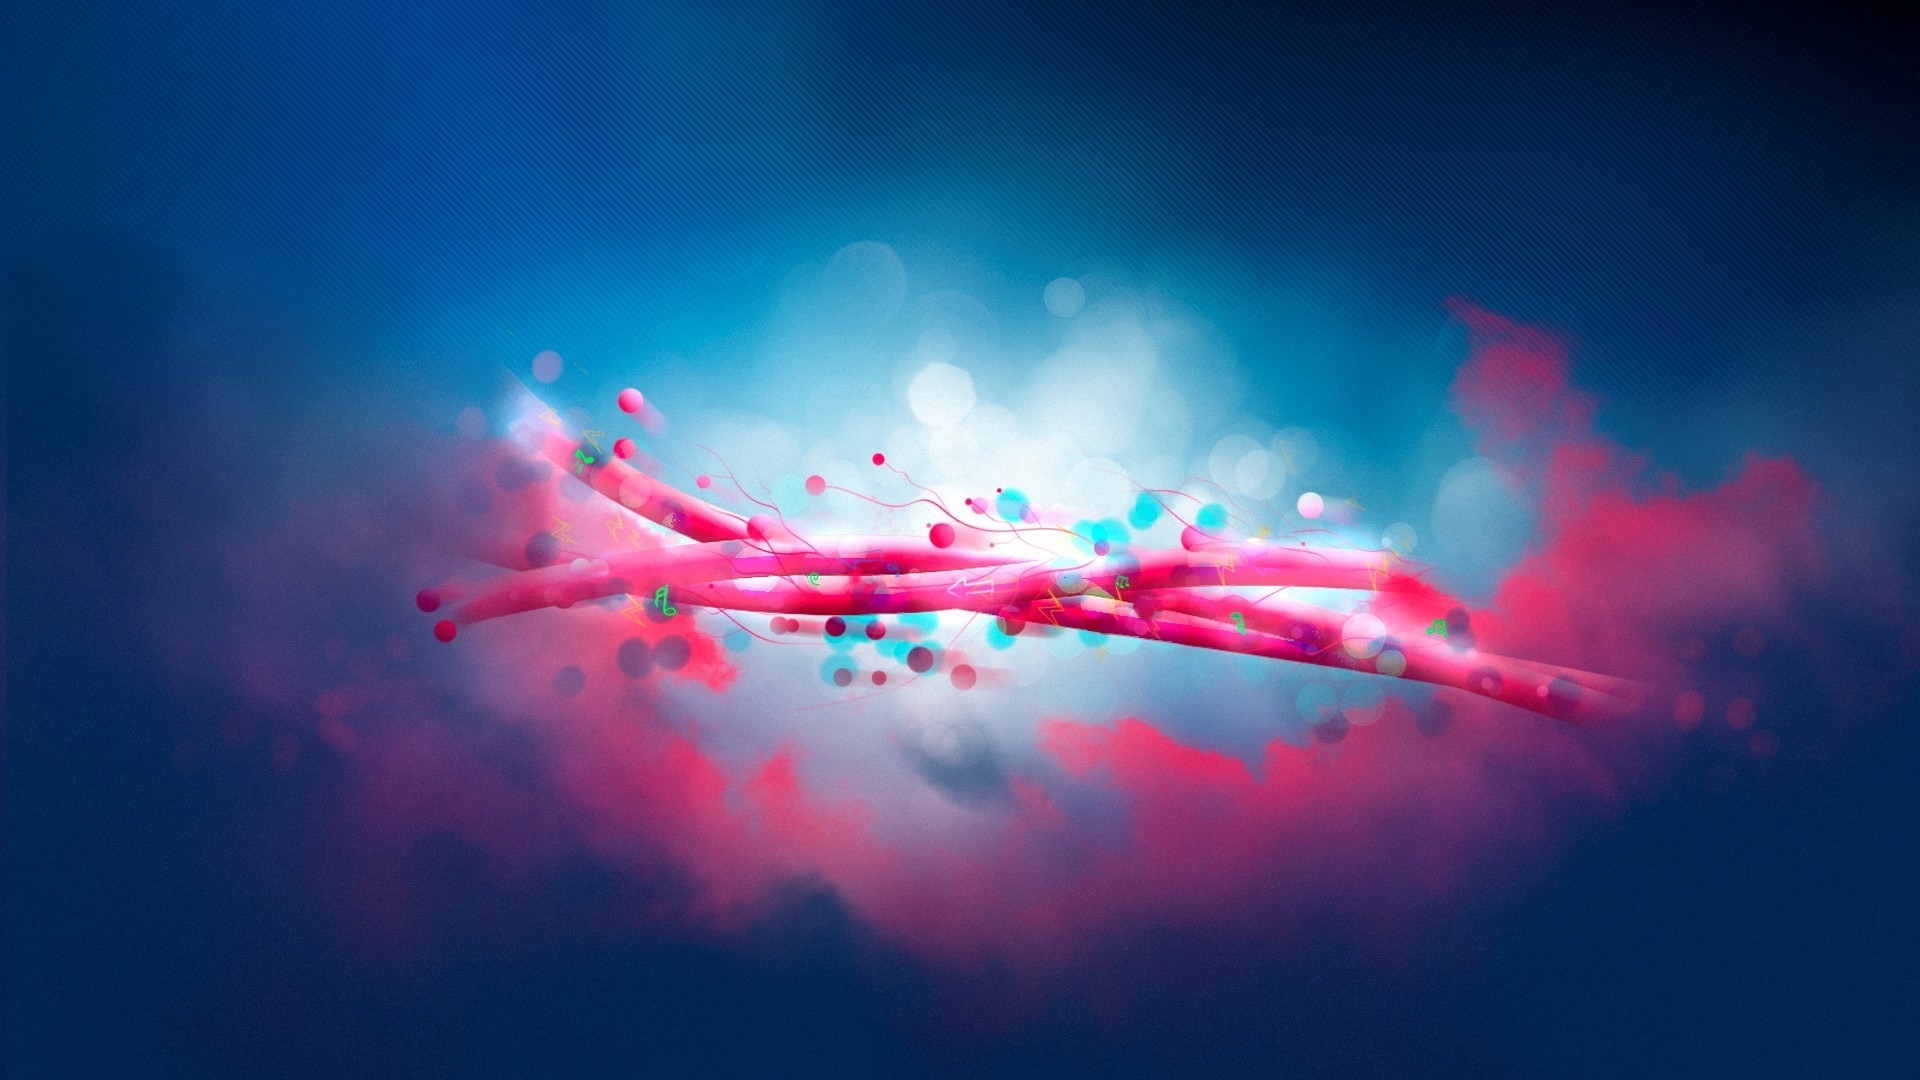 magic network textured abstract full hd wallpapers - large hd wallpapers